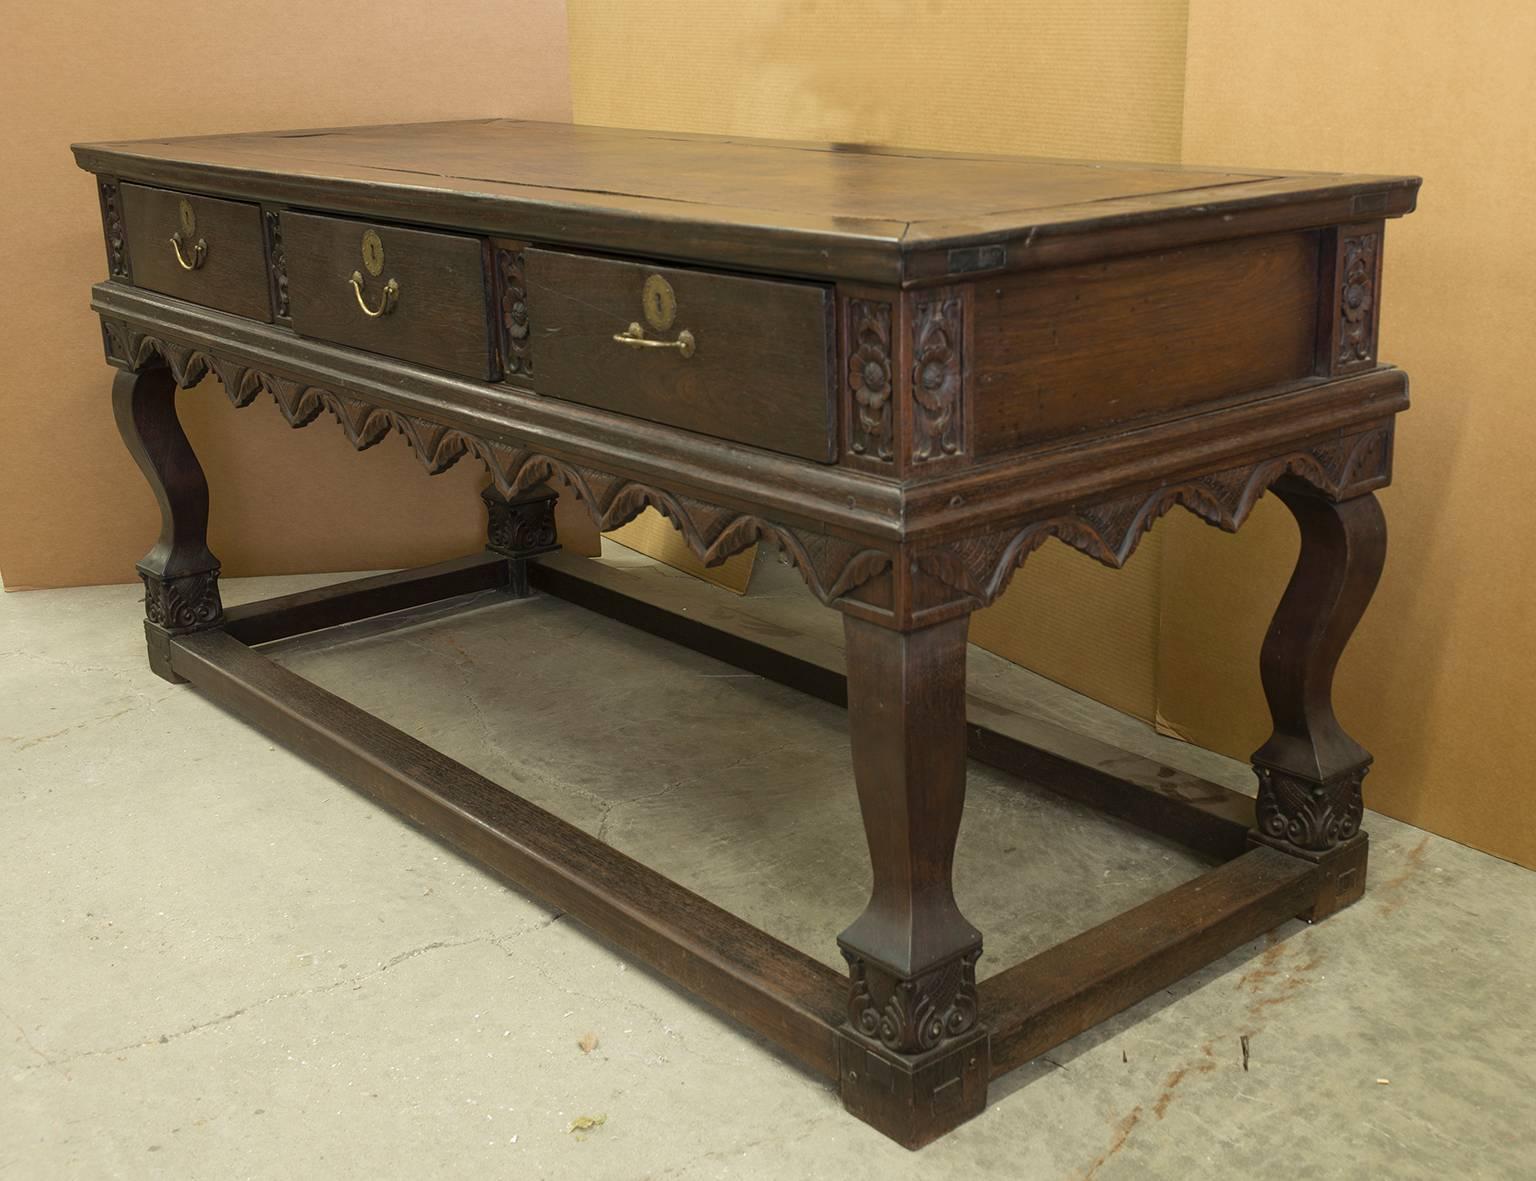 This sideboard comes from Dutch Colonial Guyana. It features a pineapple motif on the feet and trim